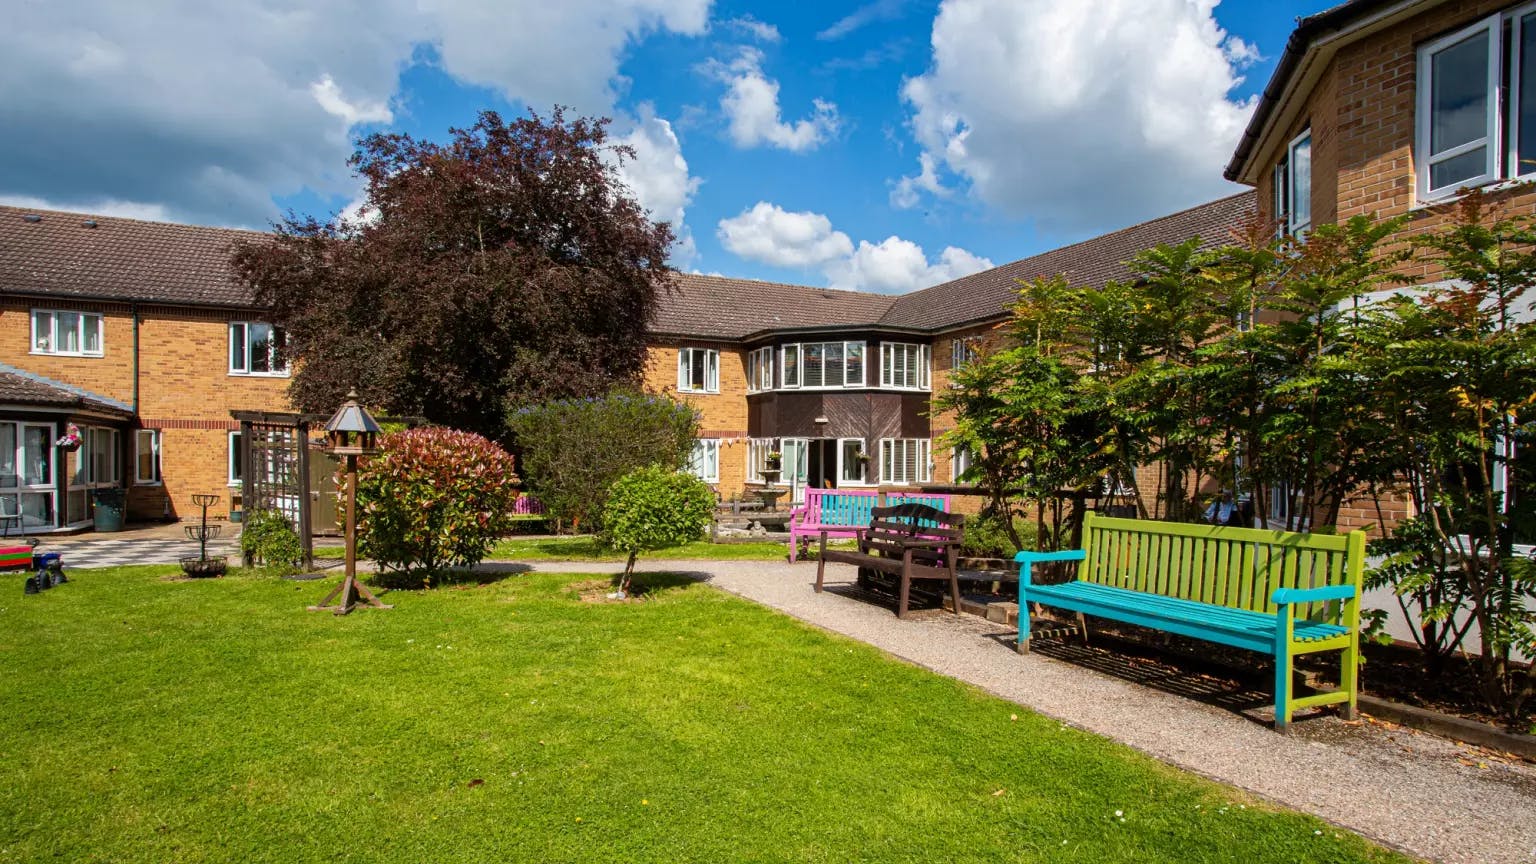 Exterior of Fosse House care home in St Albans, Hertfordshire